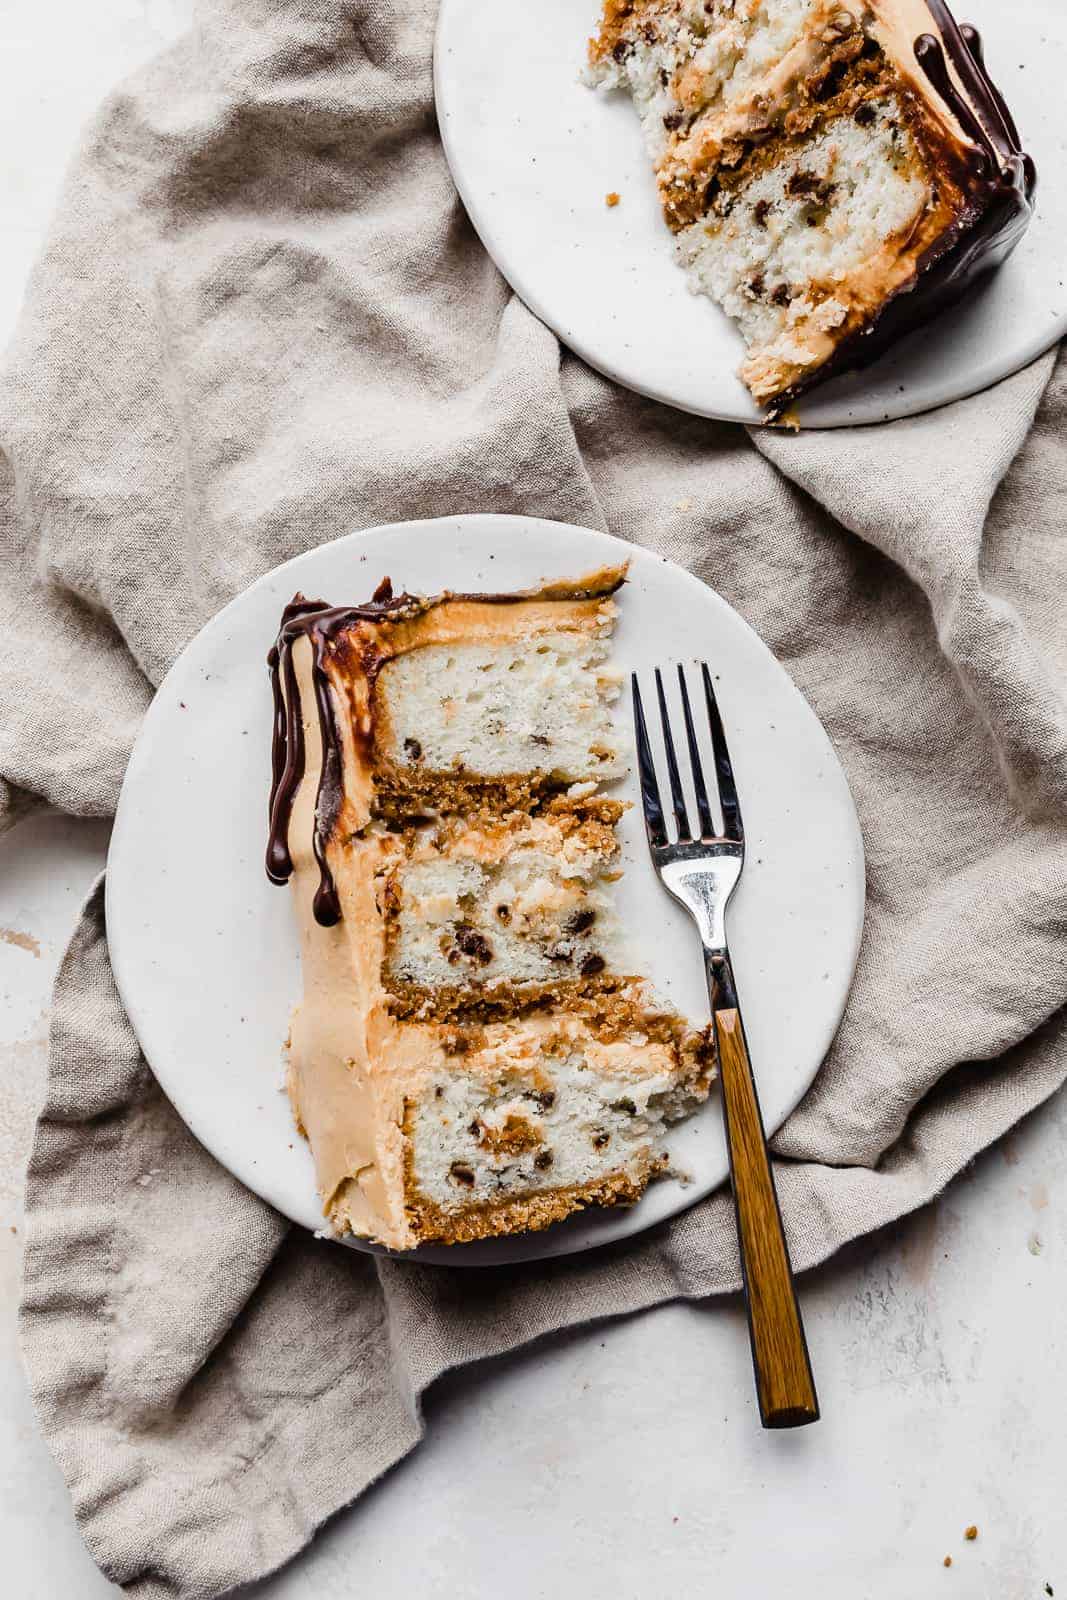 A slice of 7 Layer Bar Cake on a white plate with a fork next to the cake.